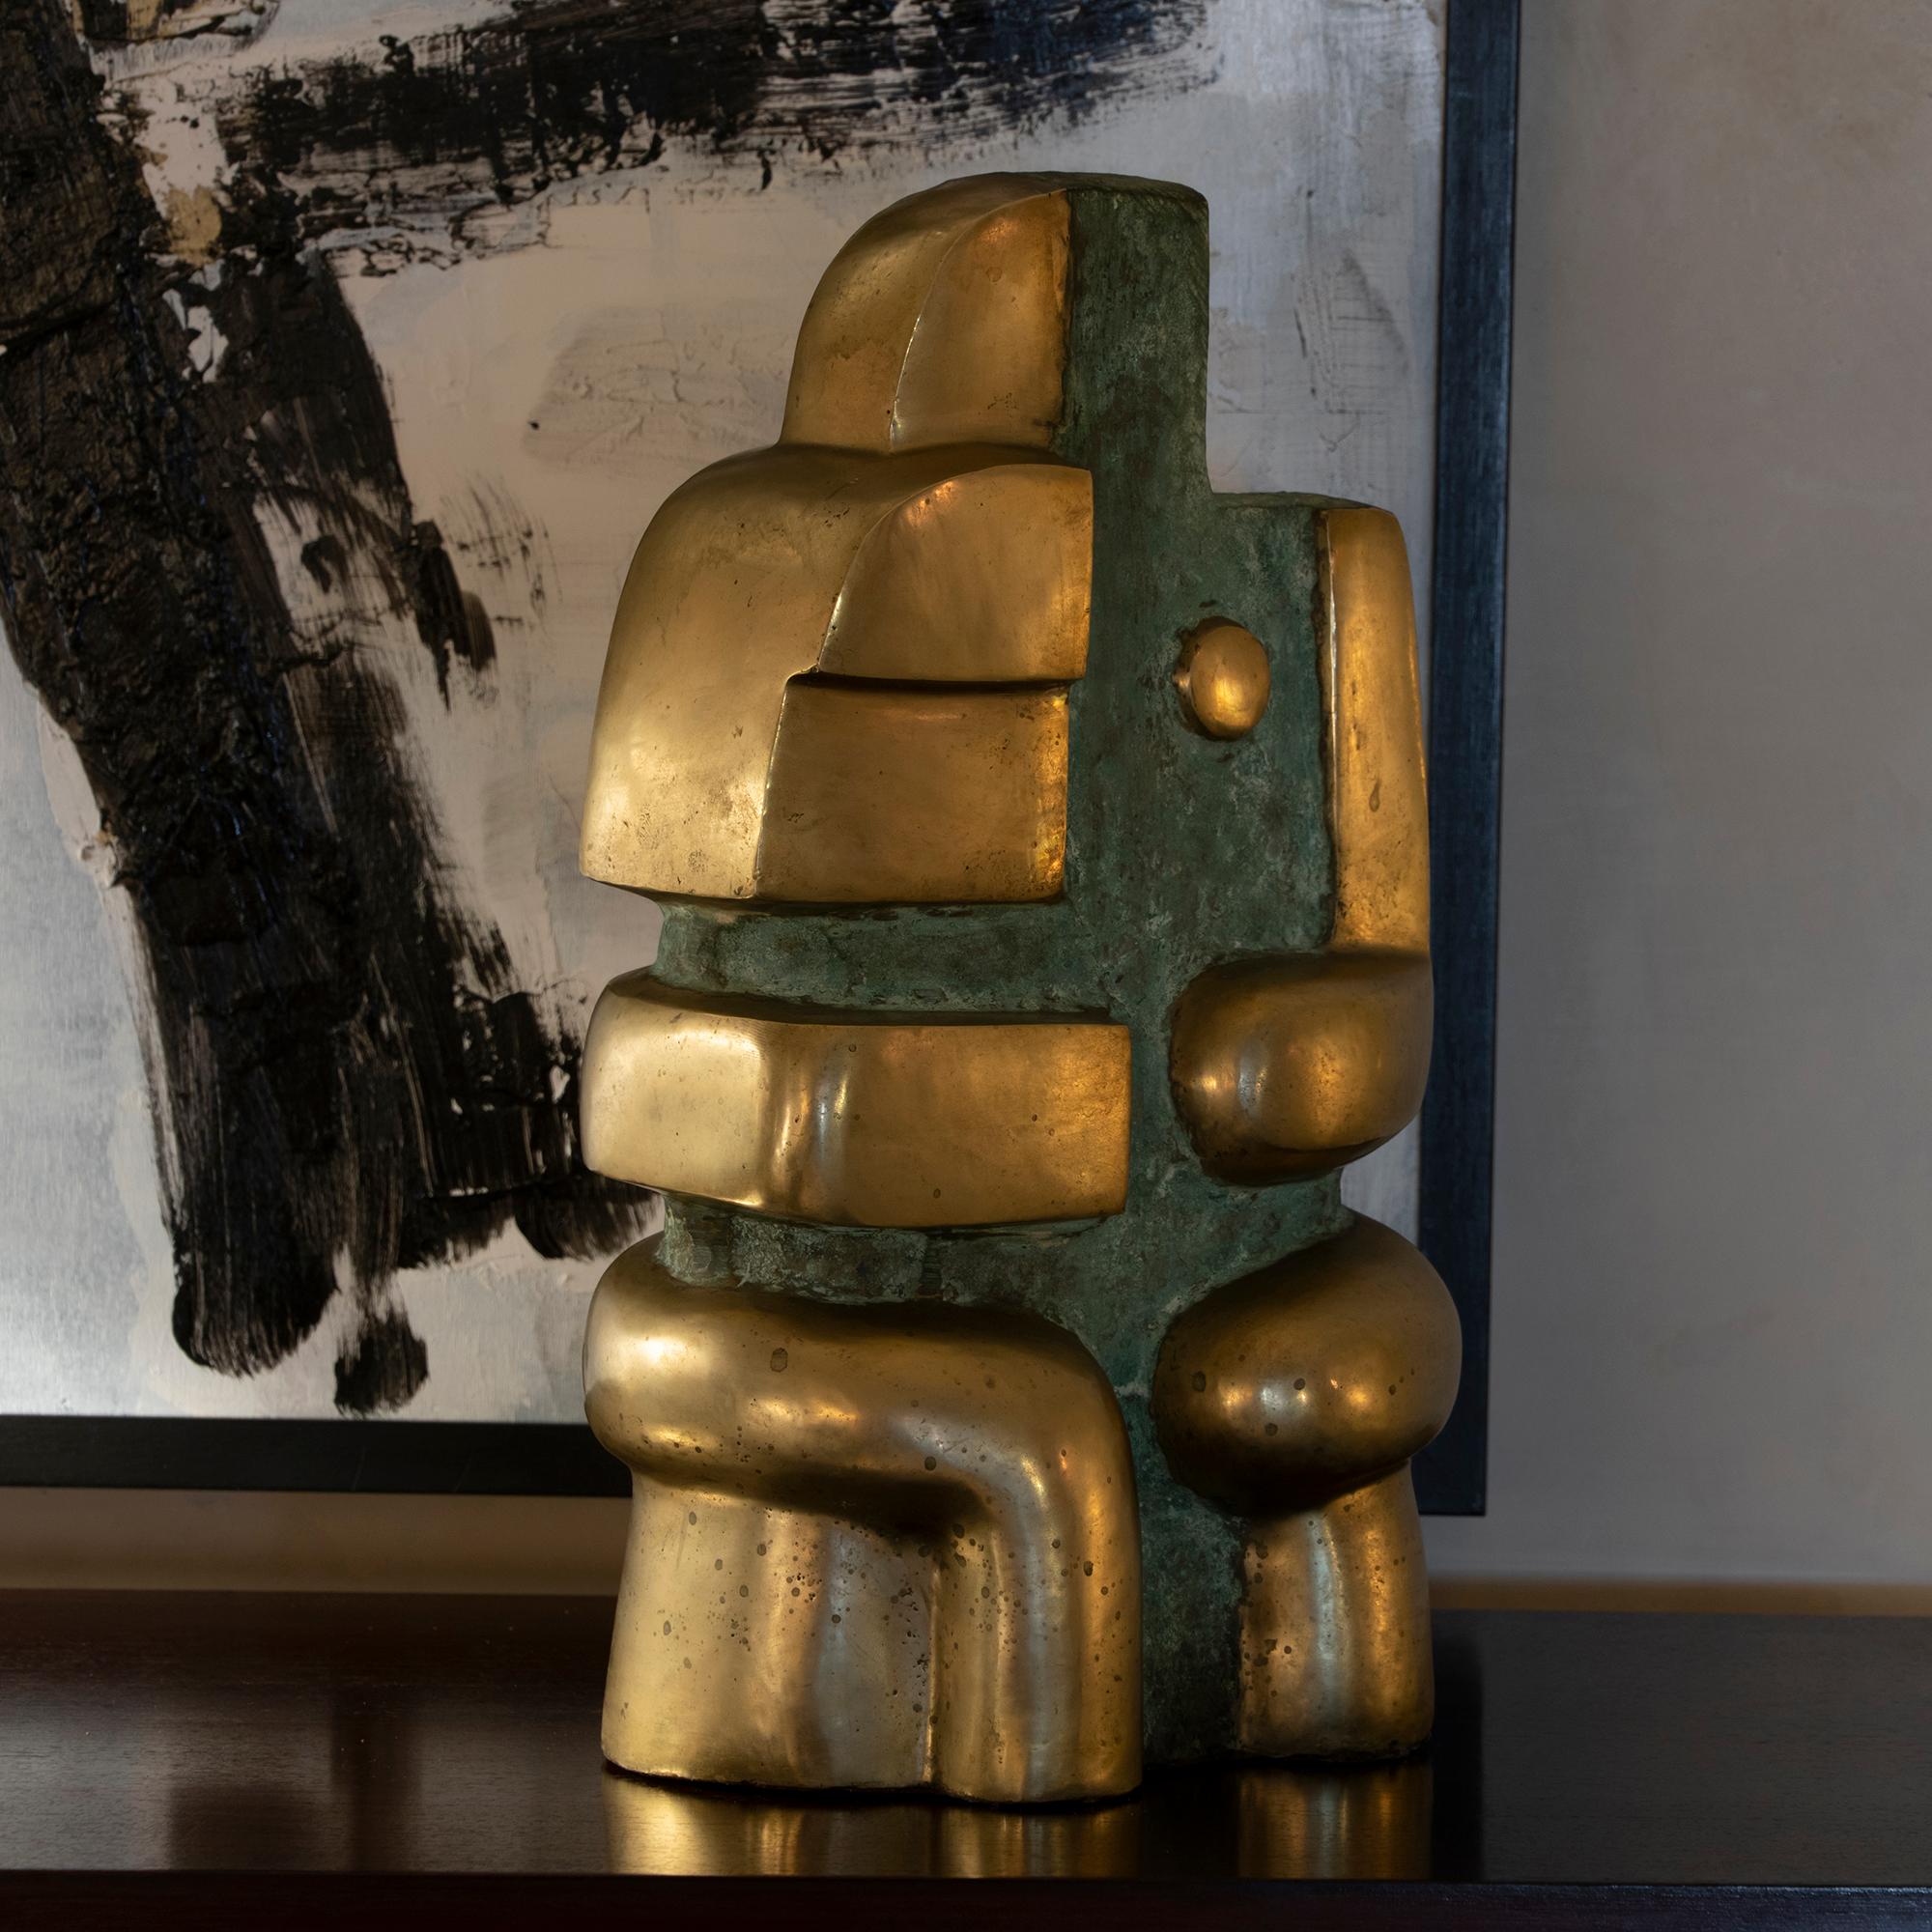 Late 20th Century Polished Bronze Abstract Sculpture, Signed and Dated Pita Zaire 89